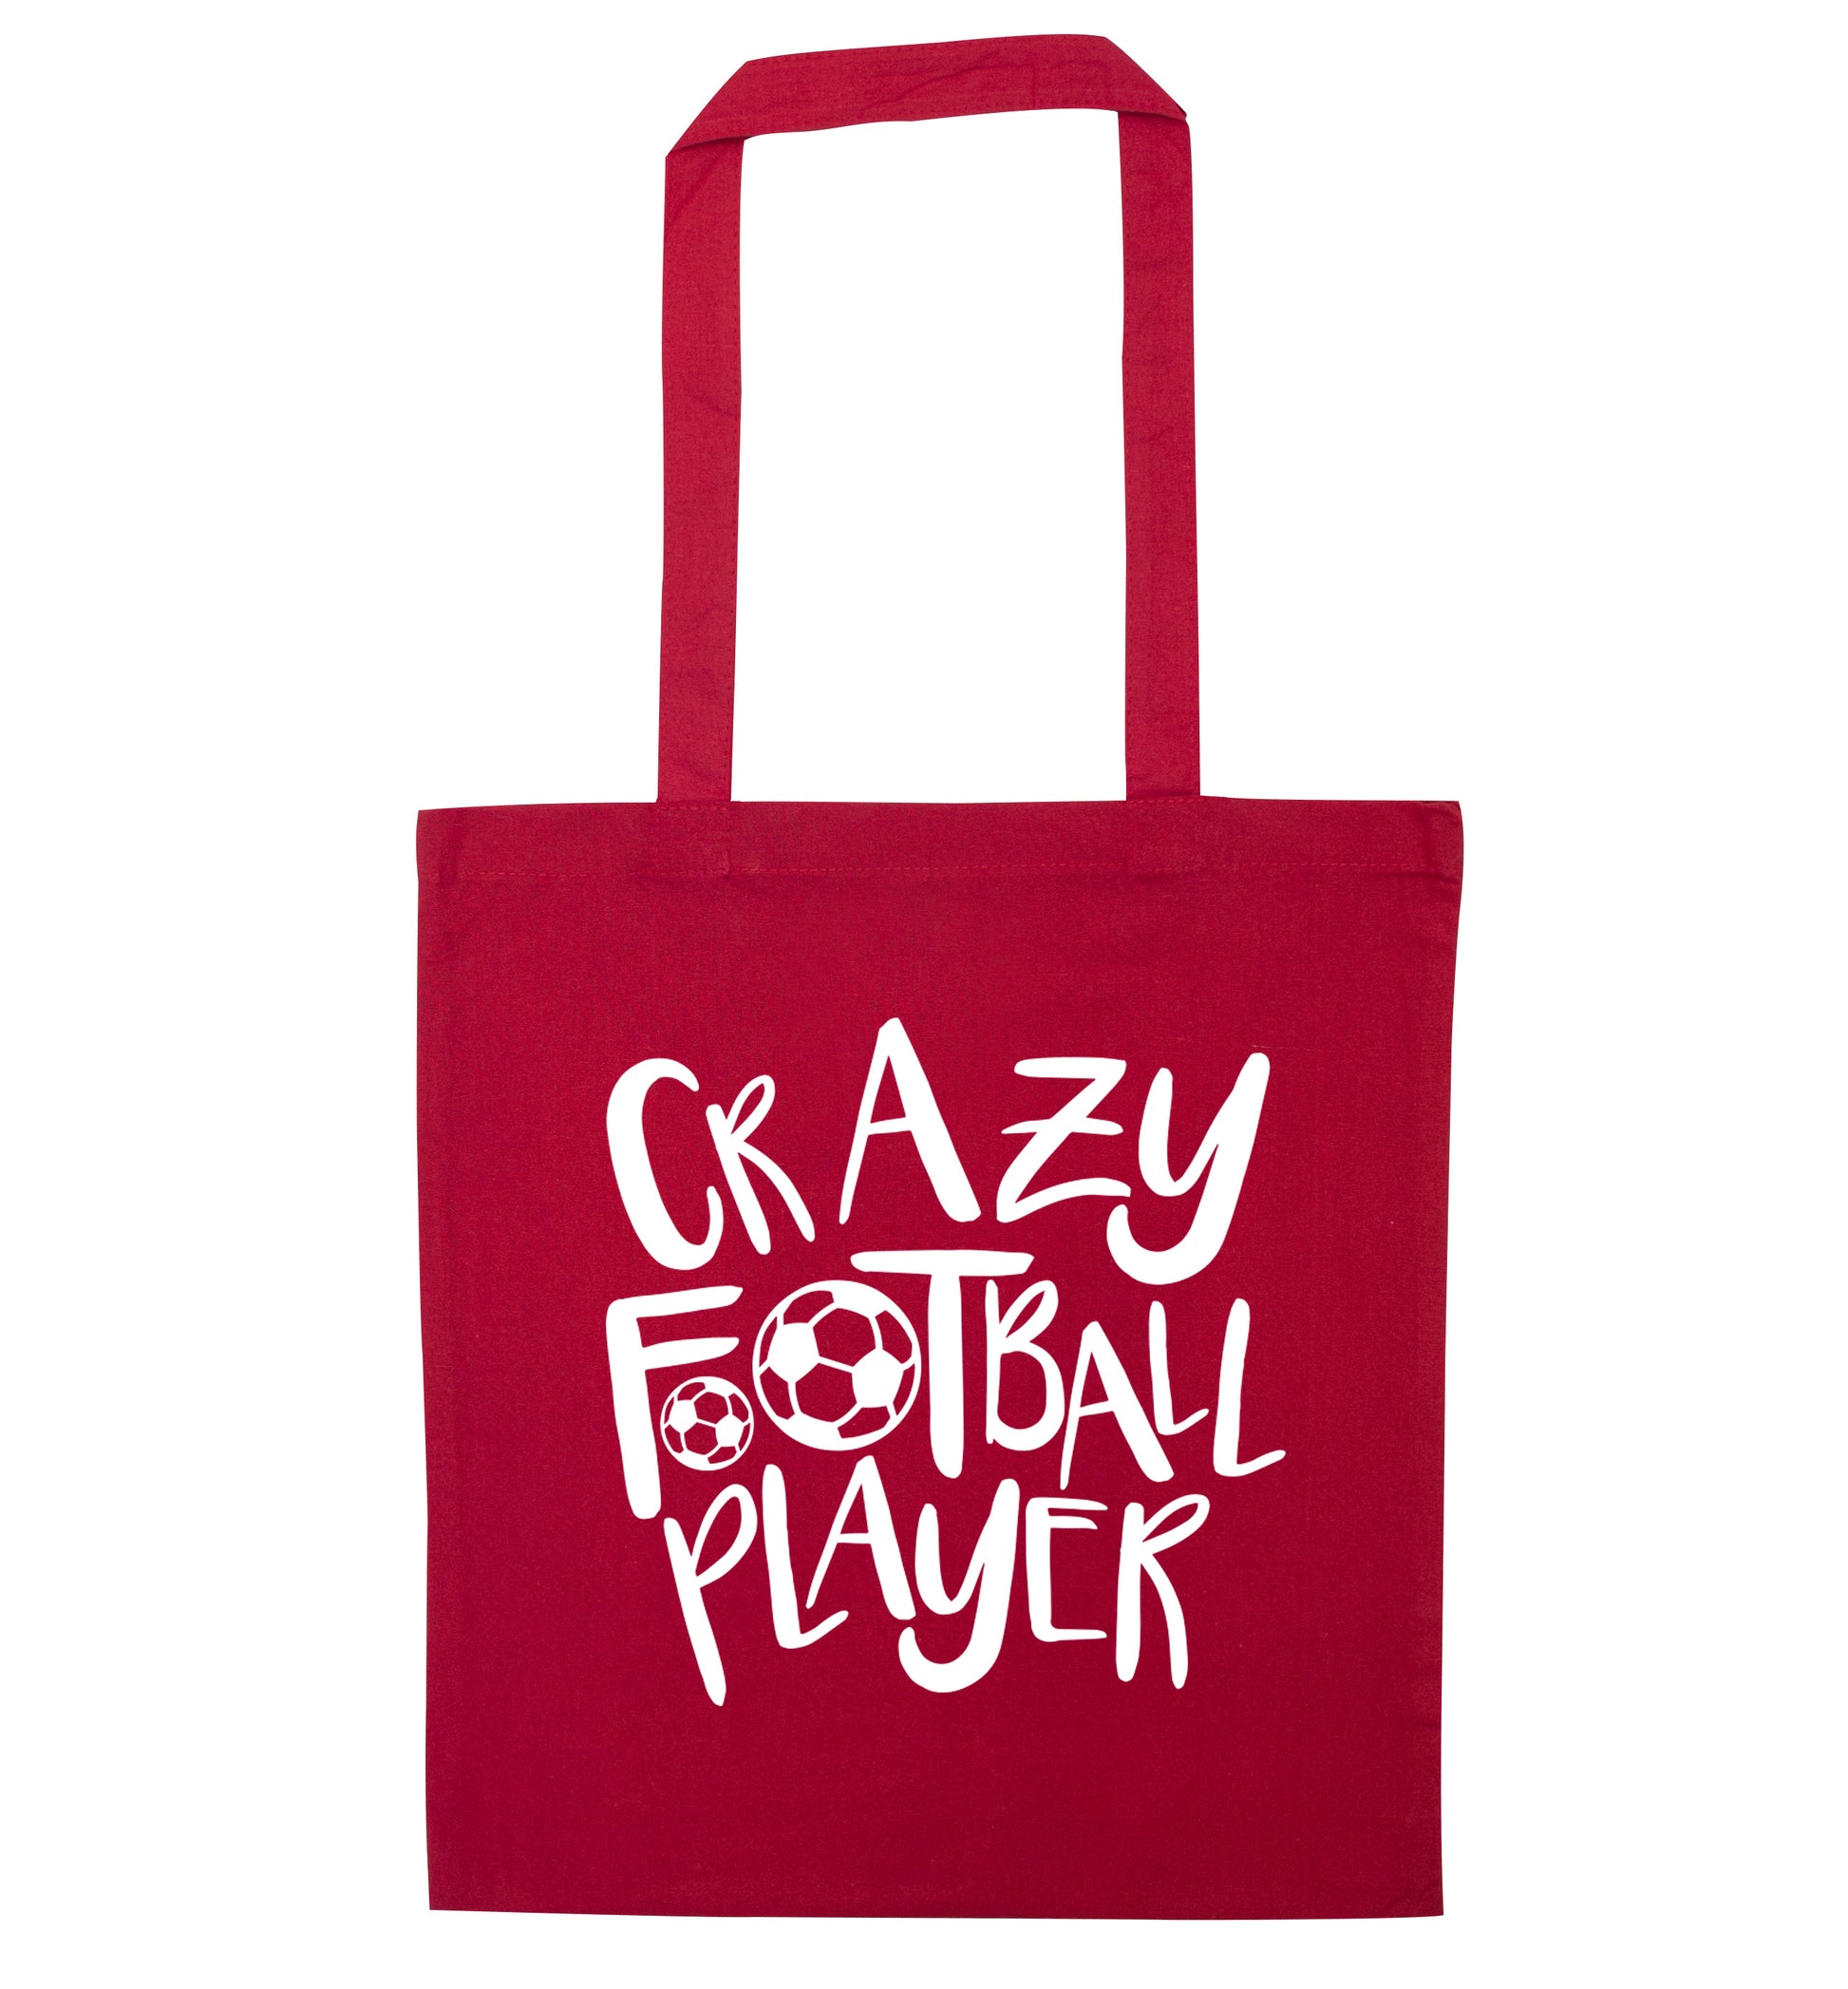 Crazy football player red tote bag